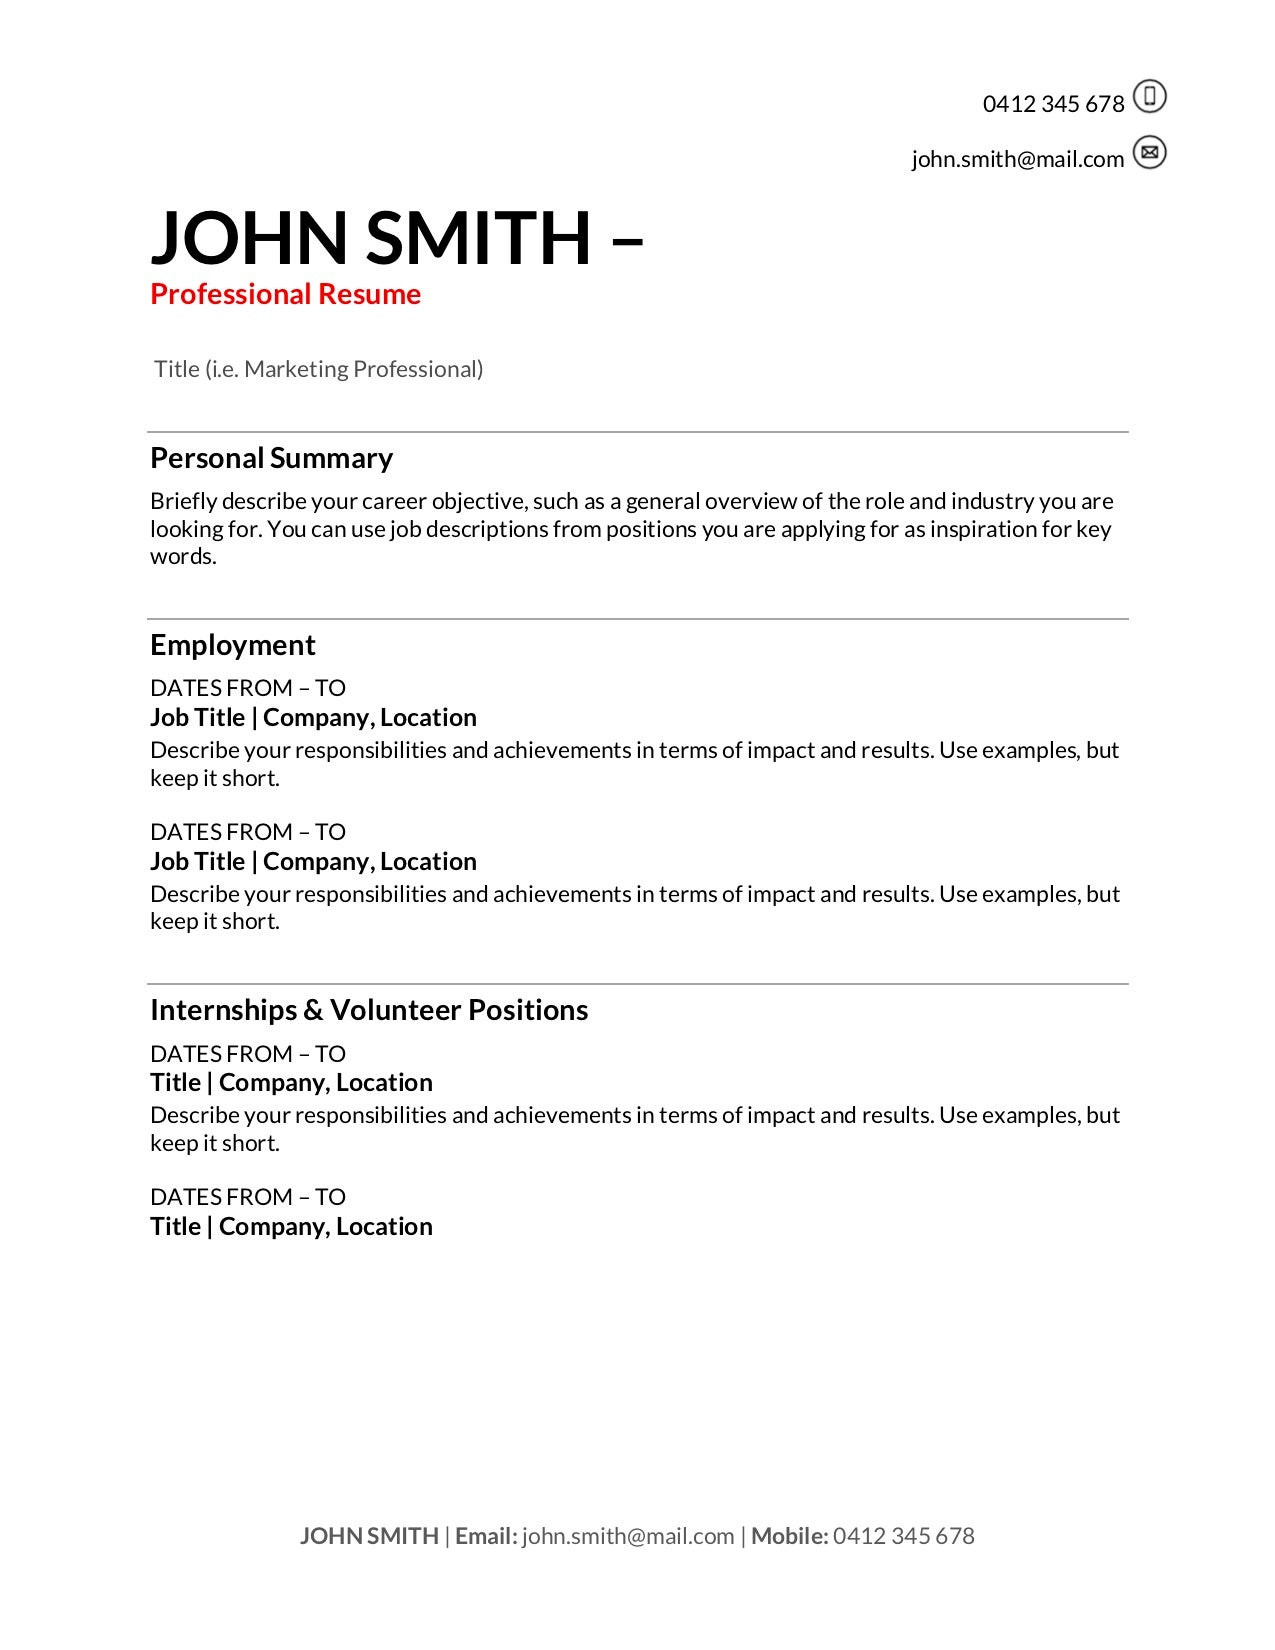 Sample Resume with Explanation for why You Re Seeking Regular Employment Free Resume Templates [download]: How to Write A Resume In 2022 …